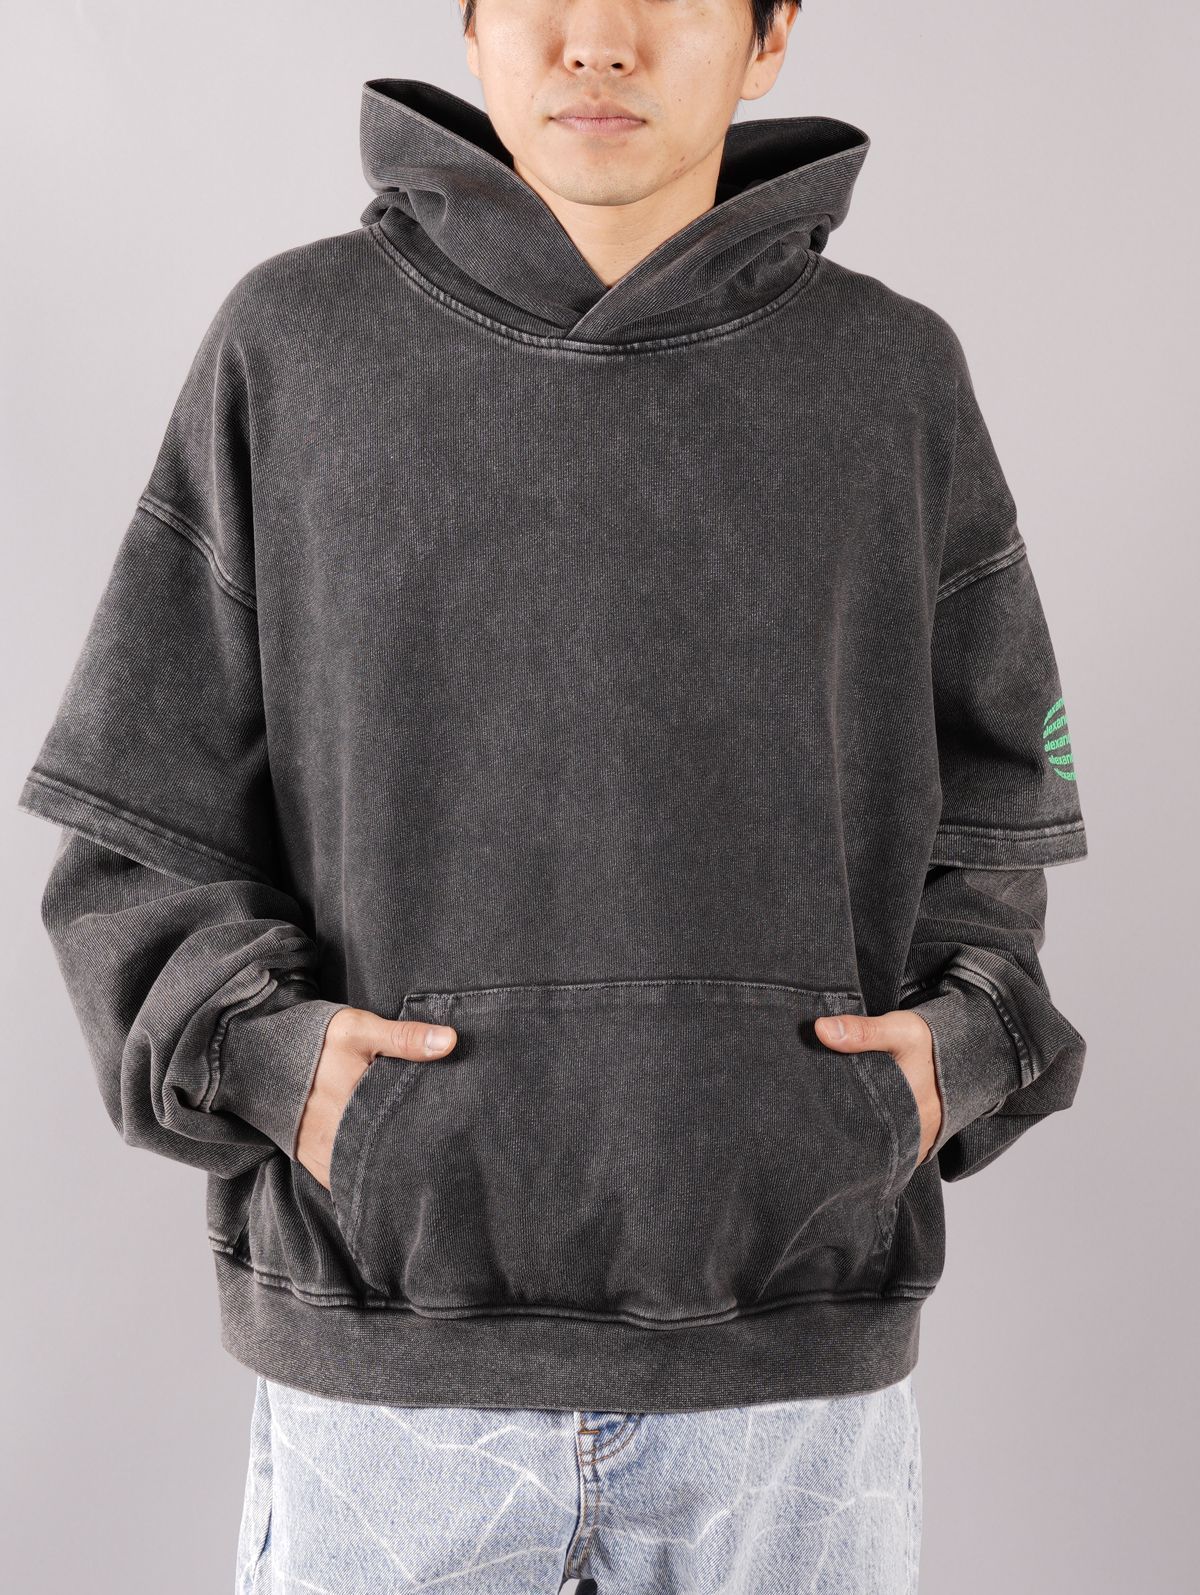 p(R)ojectR® Logo Hoodie プロジェクトアール XL - placemaking.wales